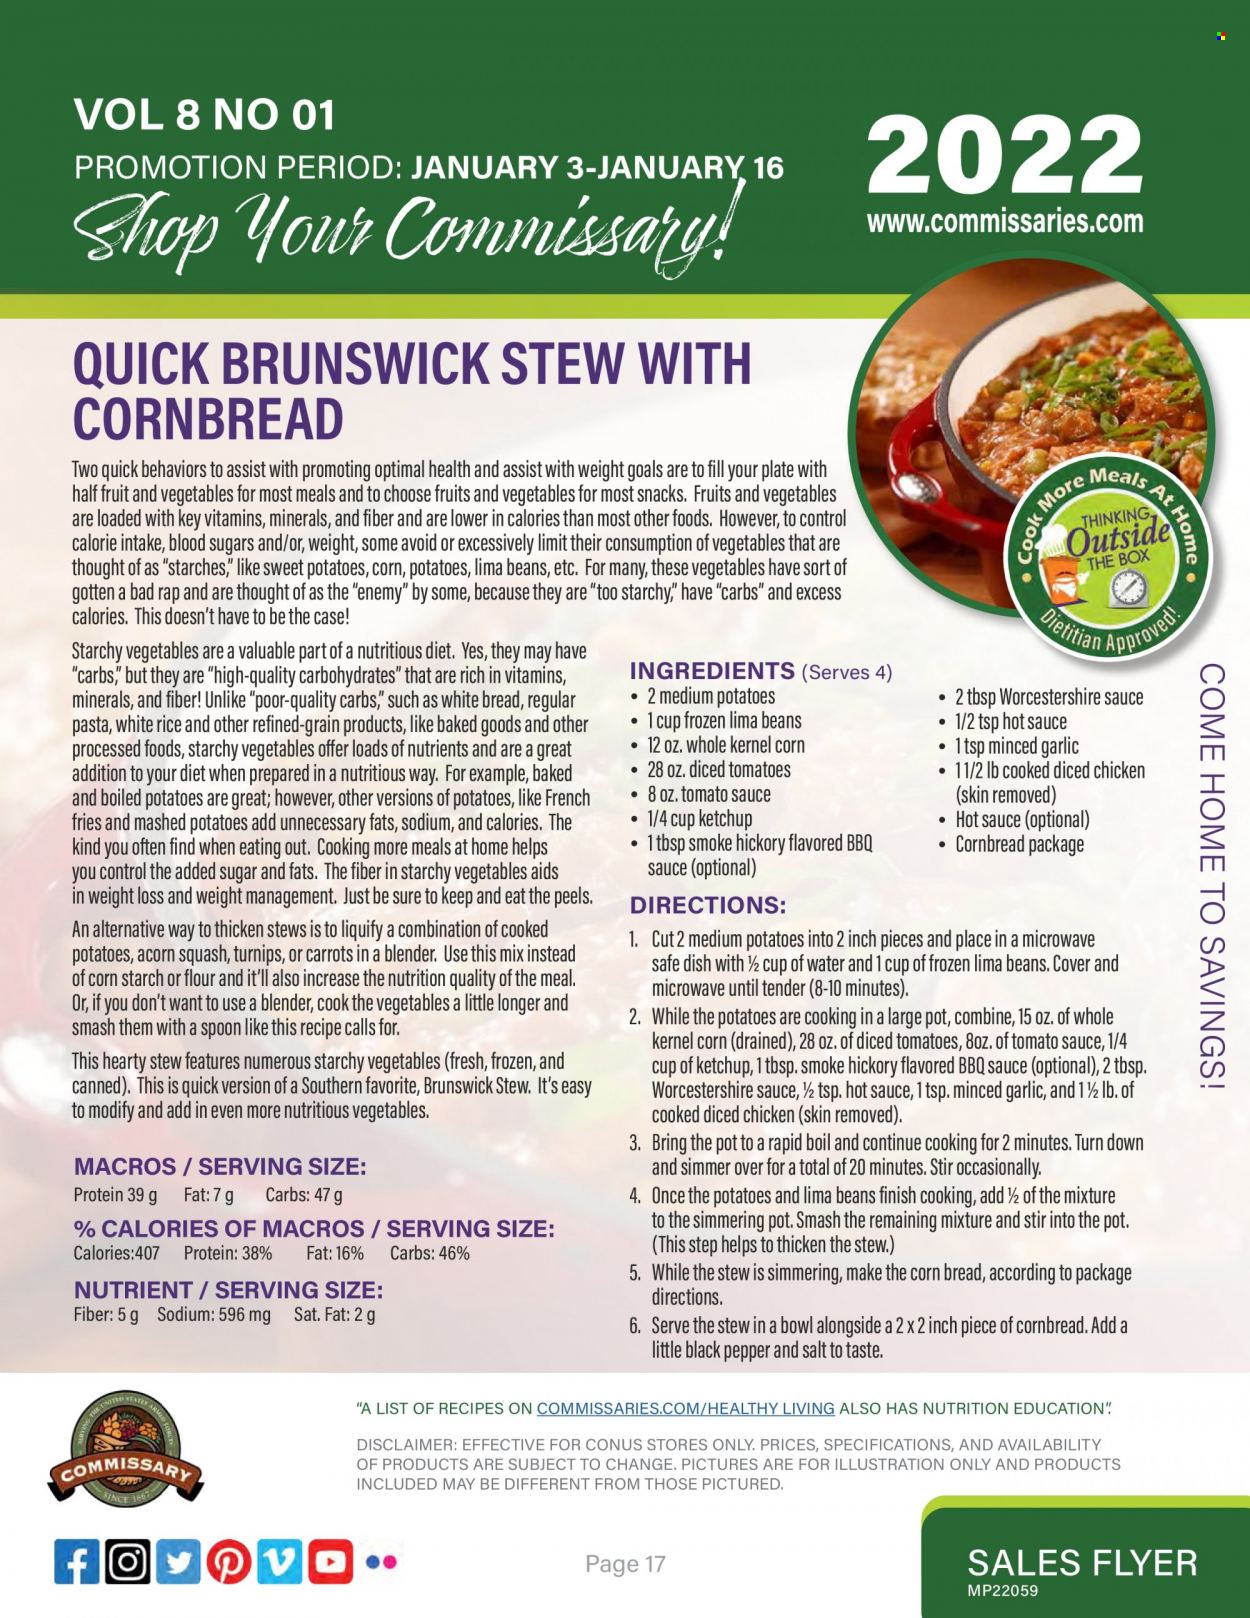 thumbnail - Commissary Flyer - 01/03/2022 - 01/16/2022 - Sales products - white bread, corn bread, sweet potato, mashed potatoes, pasta, lima beans, potato fries, snack, flour, tomato sauce, rice, white rice, black pepper, BBQ sauce, worcestershire sauce, hot sauce, ketchup, Sure, turnips. Page 17.